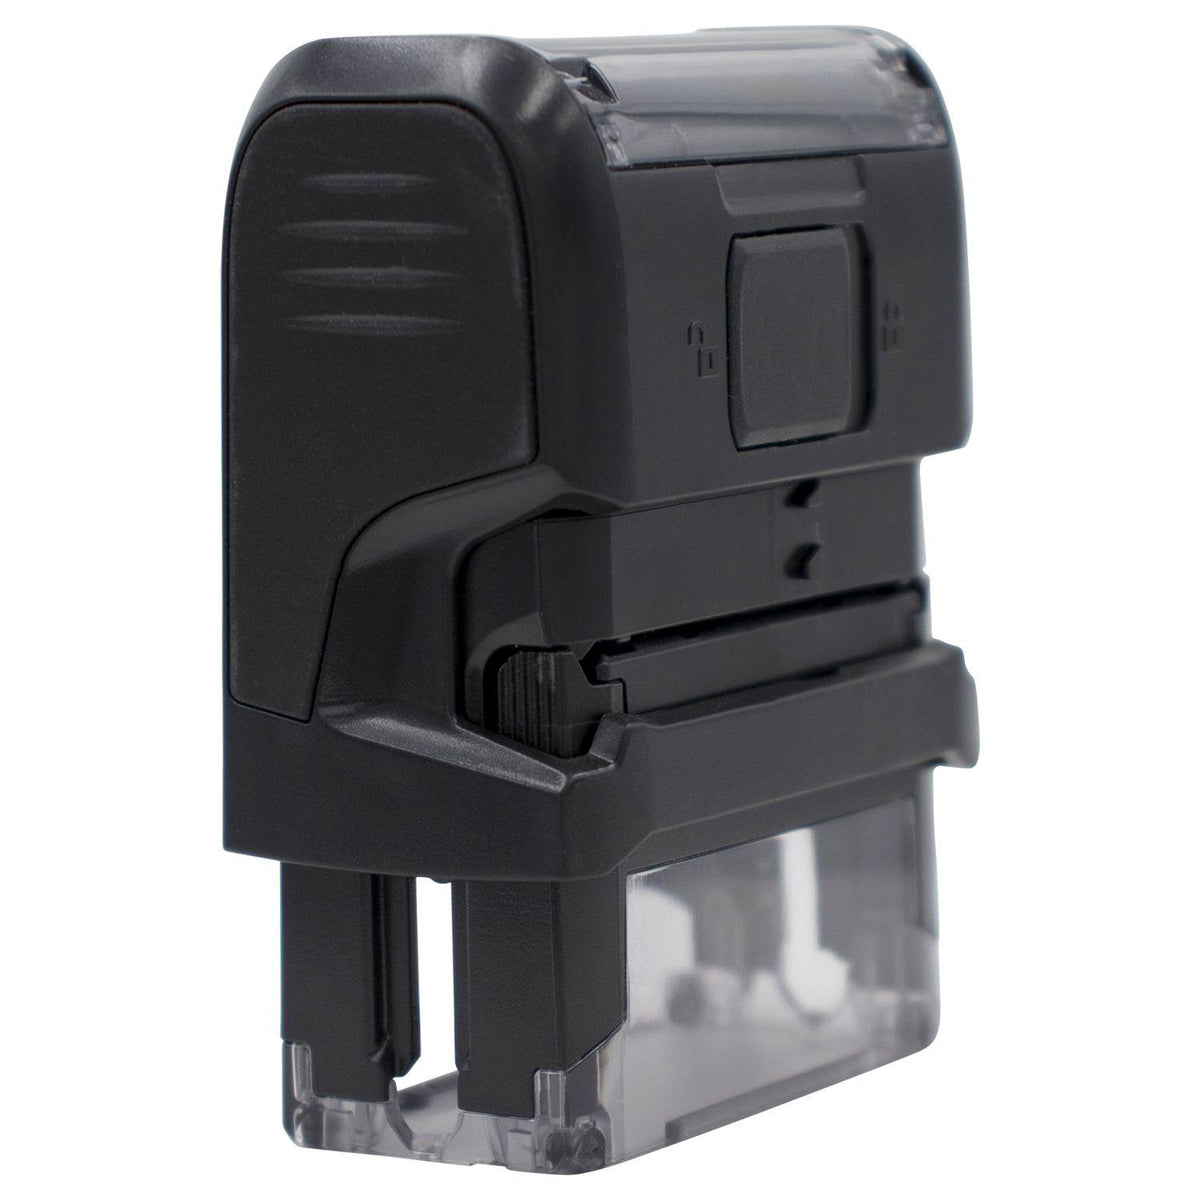 Self Inking COD Stamp With Outline Text - Engineer Seal Stamps - Brand_Trodat, Impression Size_Small, Stamp Type_Self-Inking Stamp, Type of Use_Business, Type of Use_Finance, Type of Use_Office